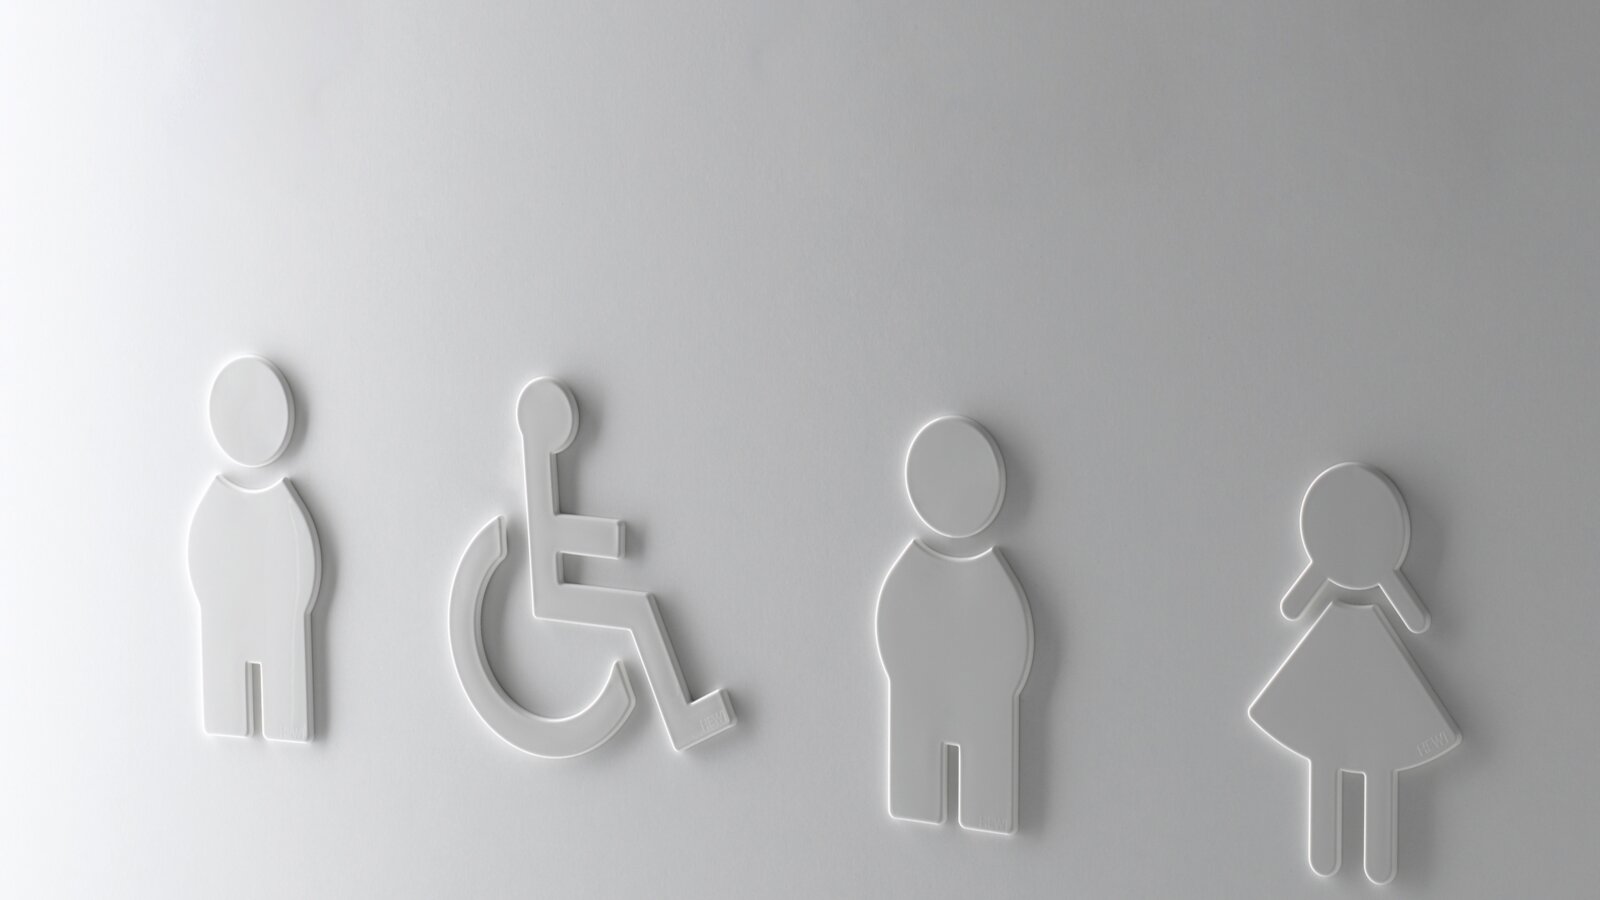 WC symbols man woman and barrier-free in the colour white made of polyamide